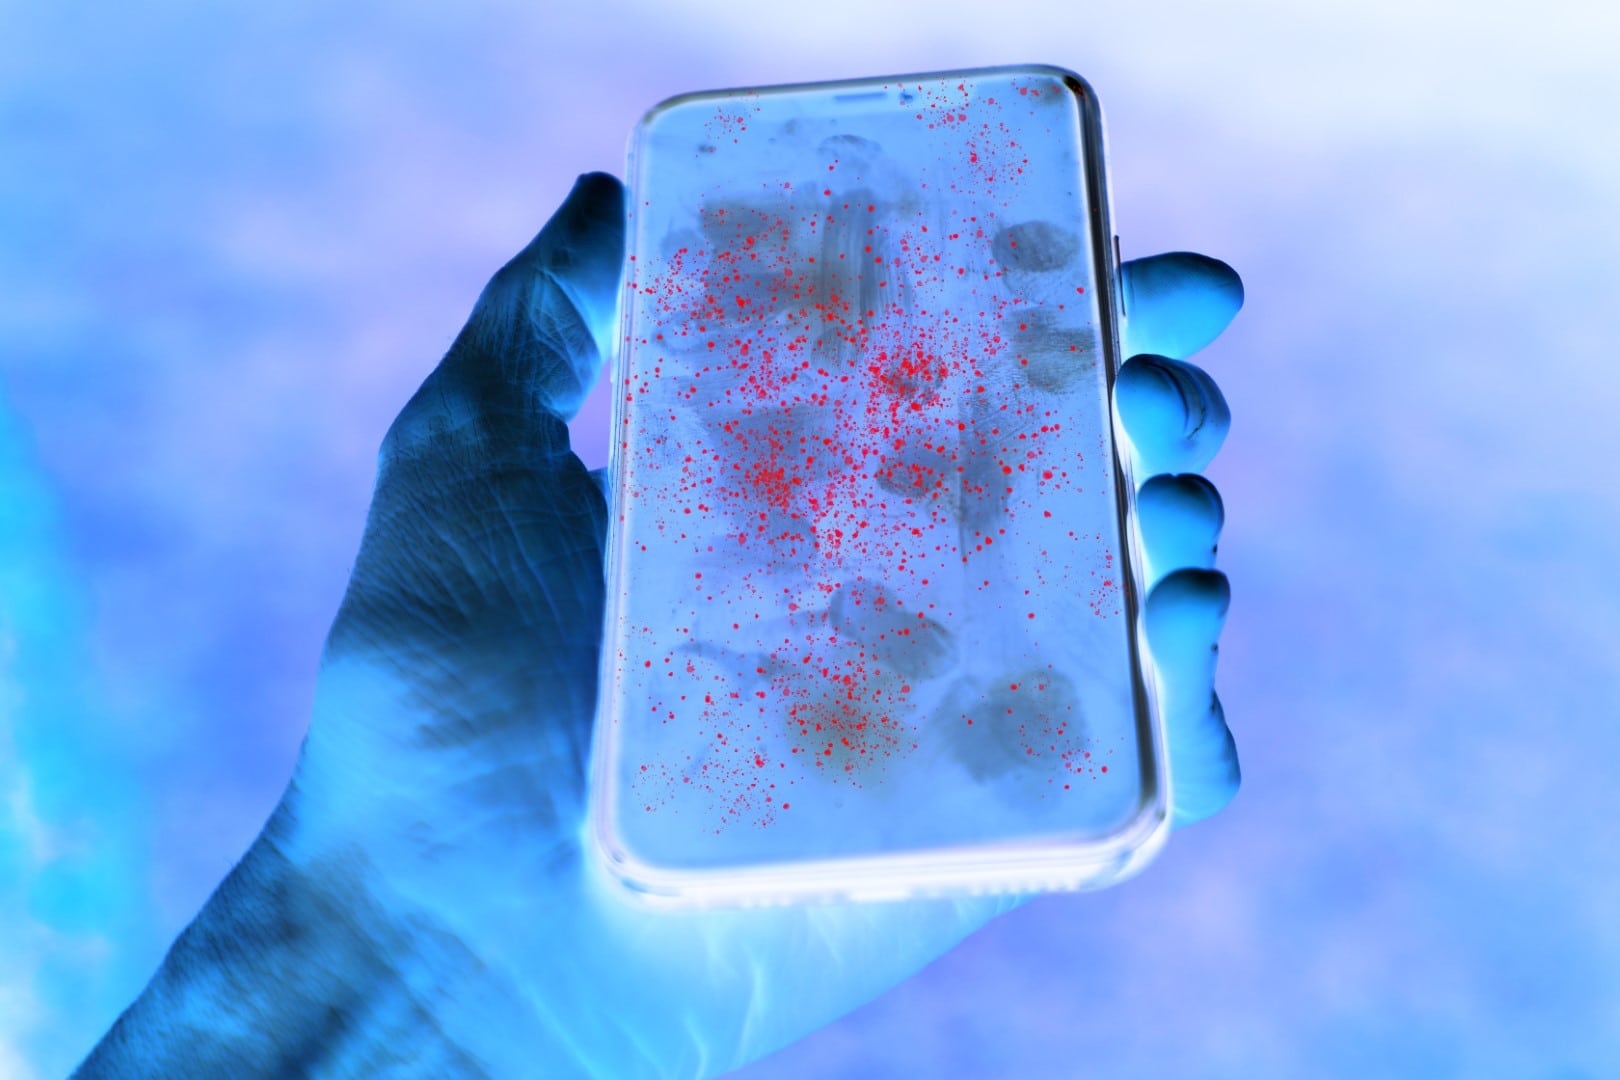 Dirty mobile phone screen with invisible germs shown in contrast